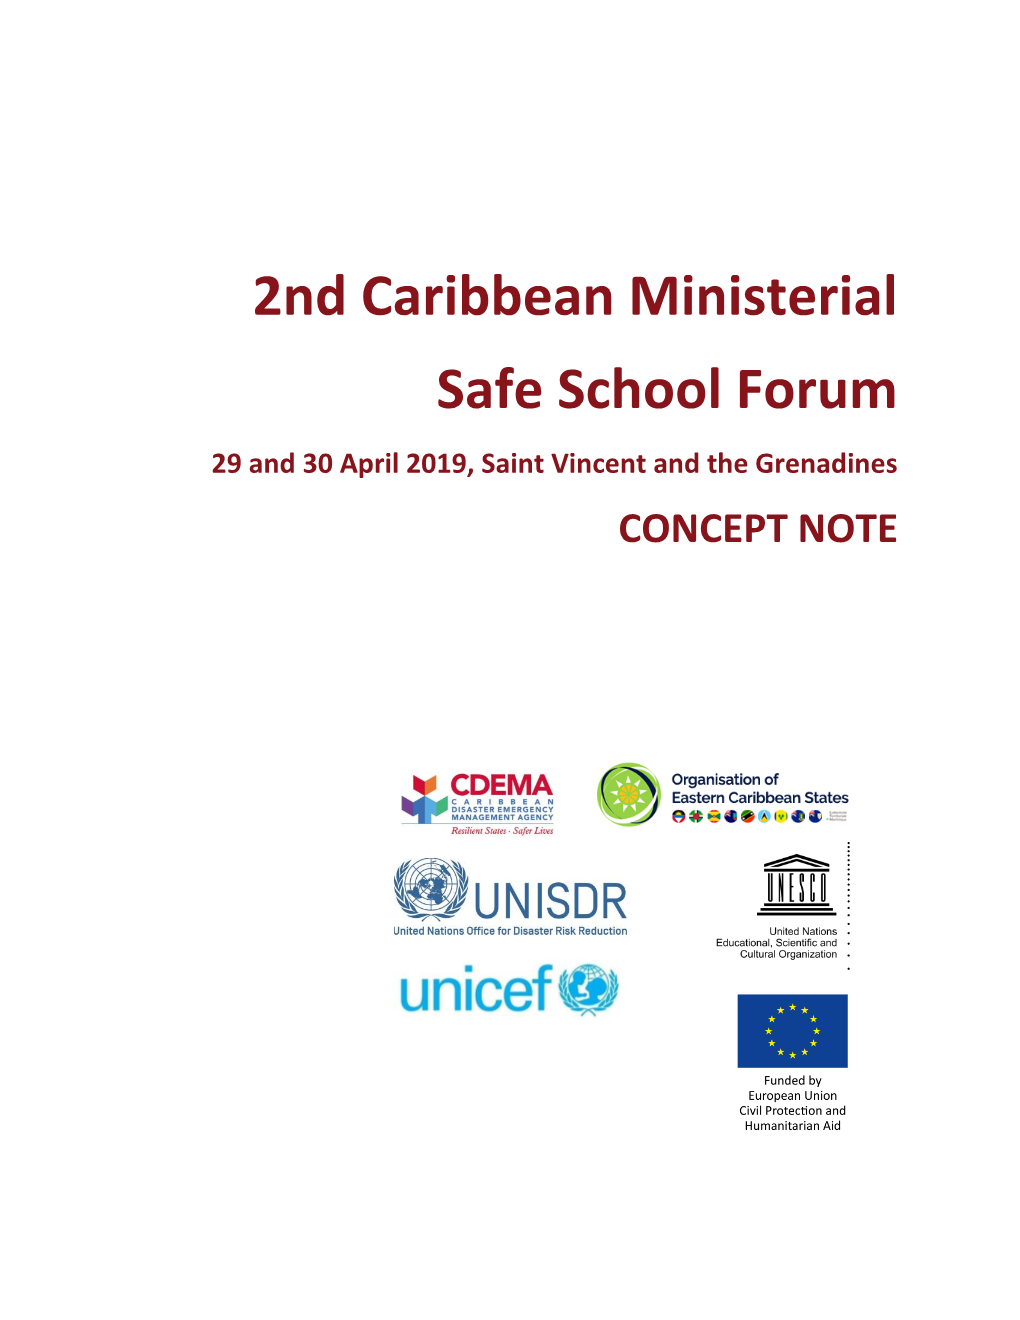 2Nd Caribbean Ministerial Safe School Forum 29 and 30 April 2019, Saint Vincent and the Grenadines CONCEPT NOTE List of Acronyms